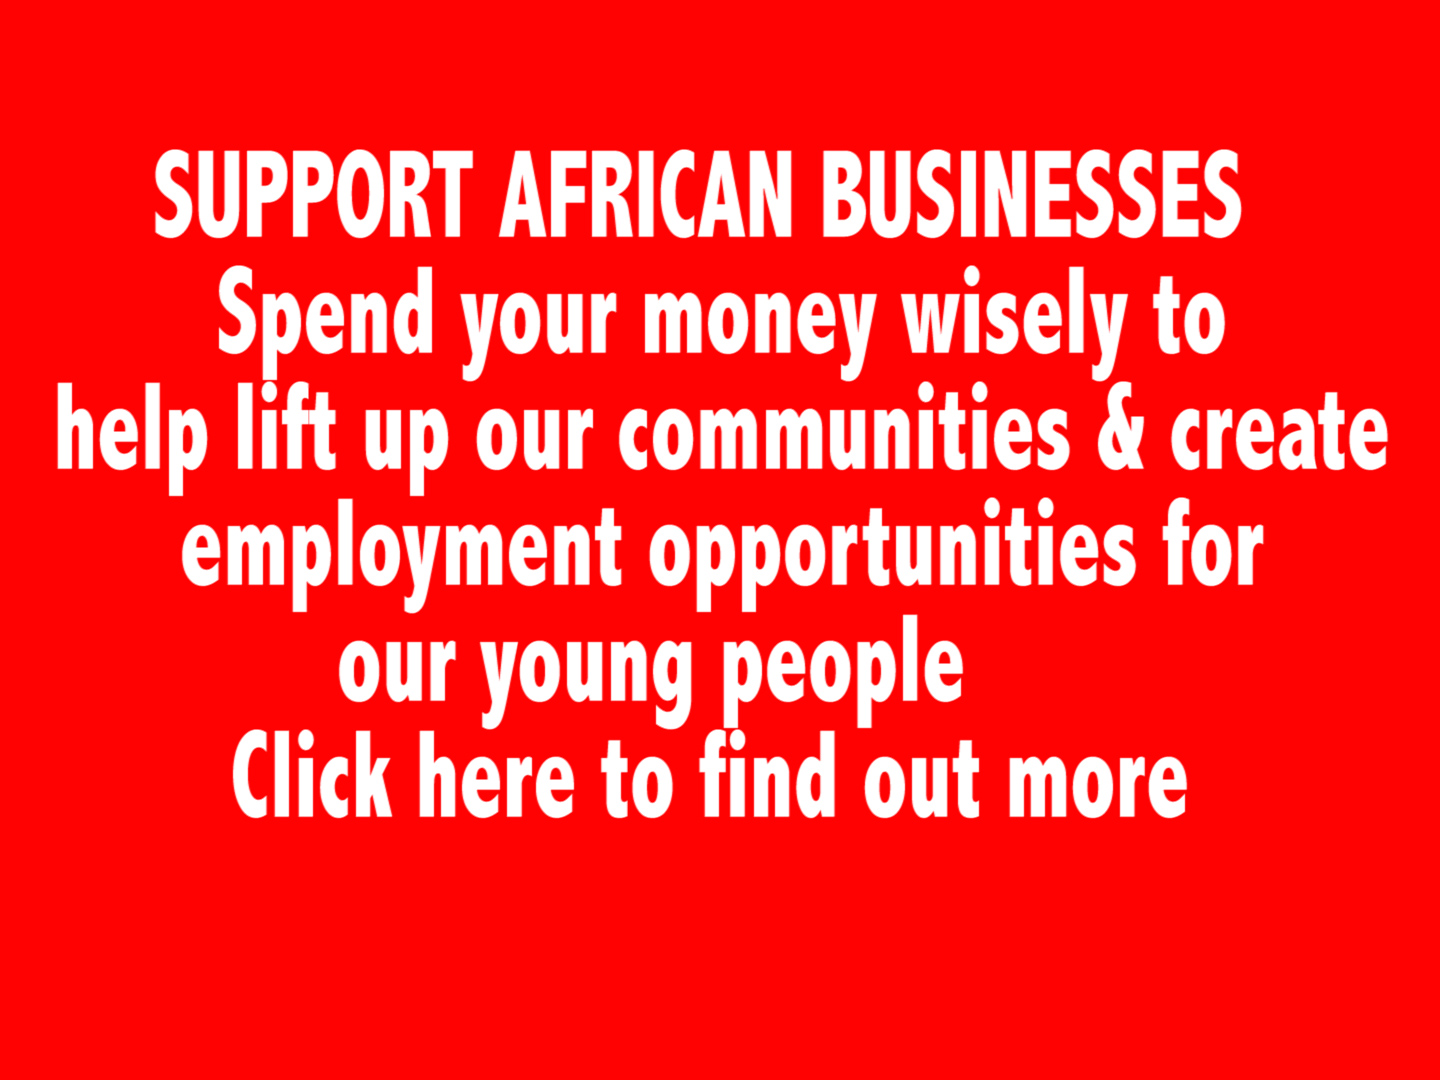 SUPPORT BUSINESSES